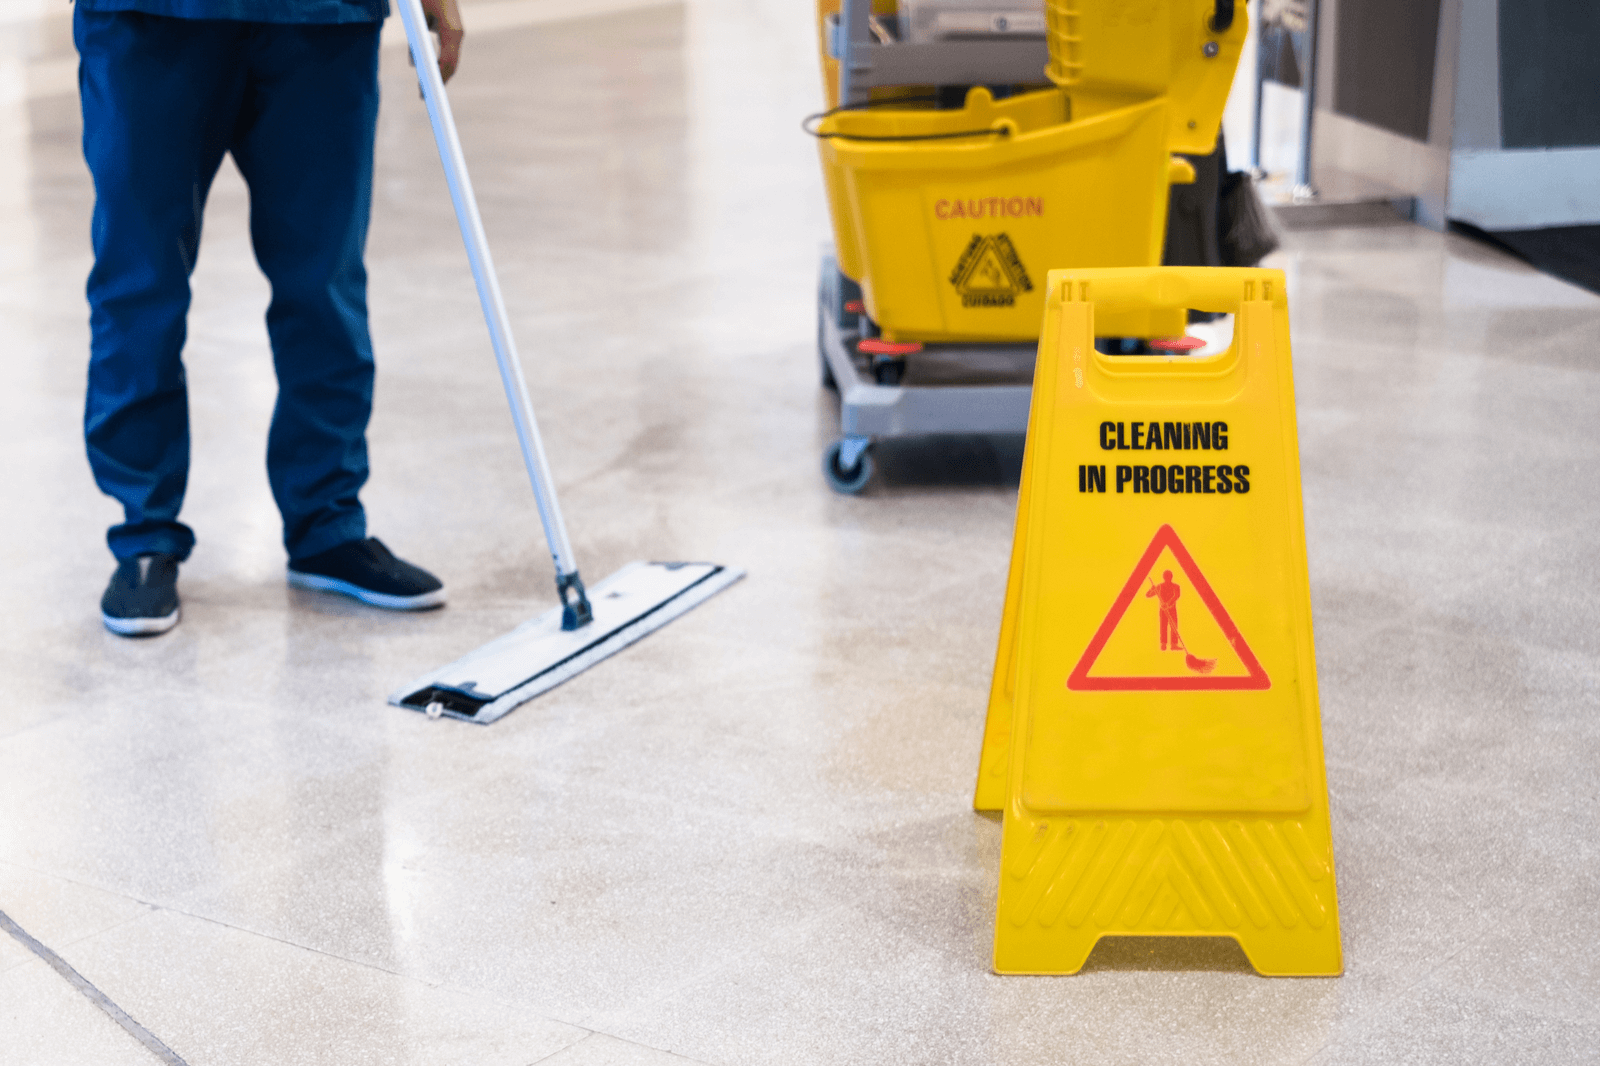 Person cleaning a hard tile floor with warning sign in place